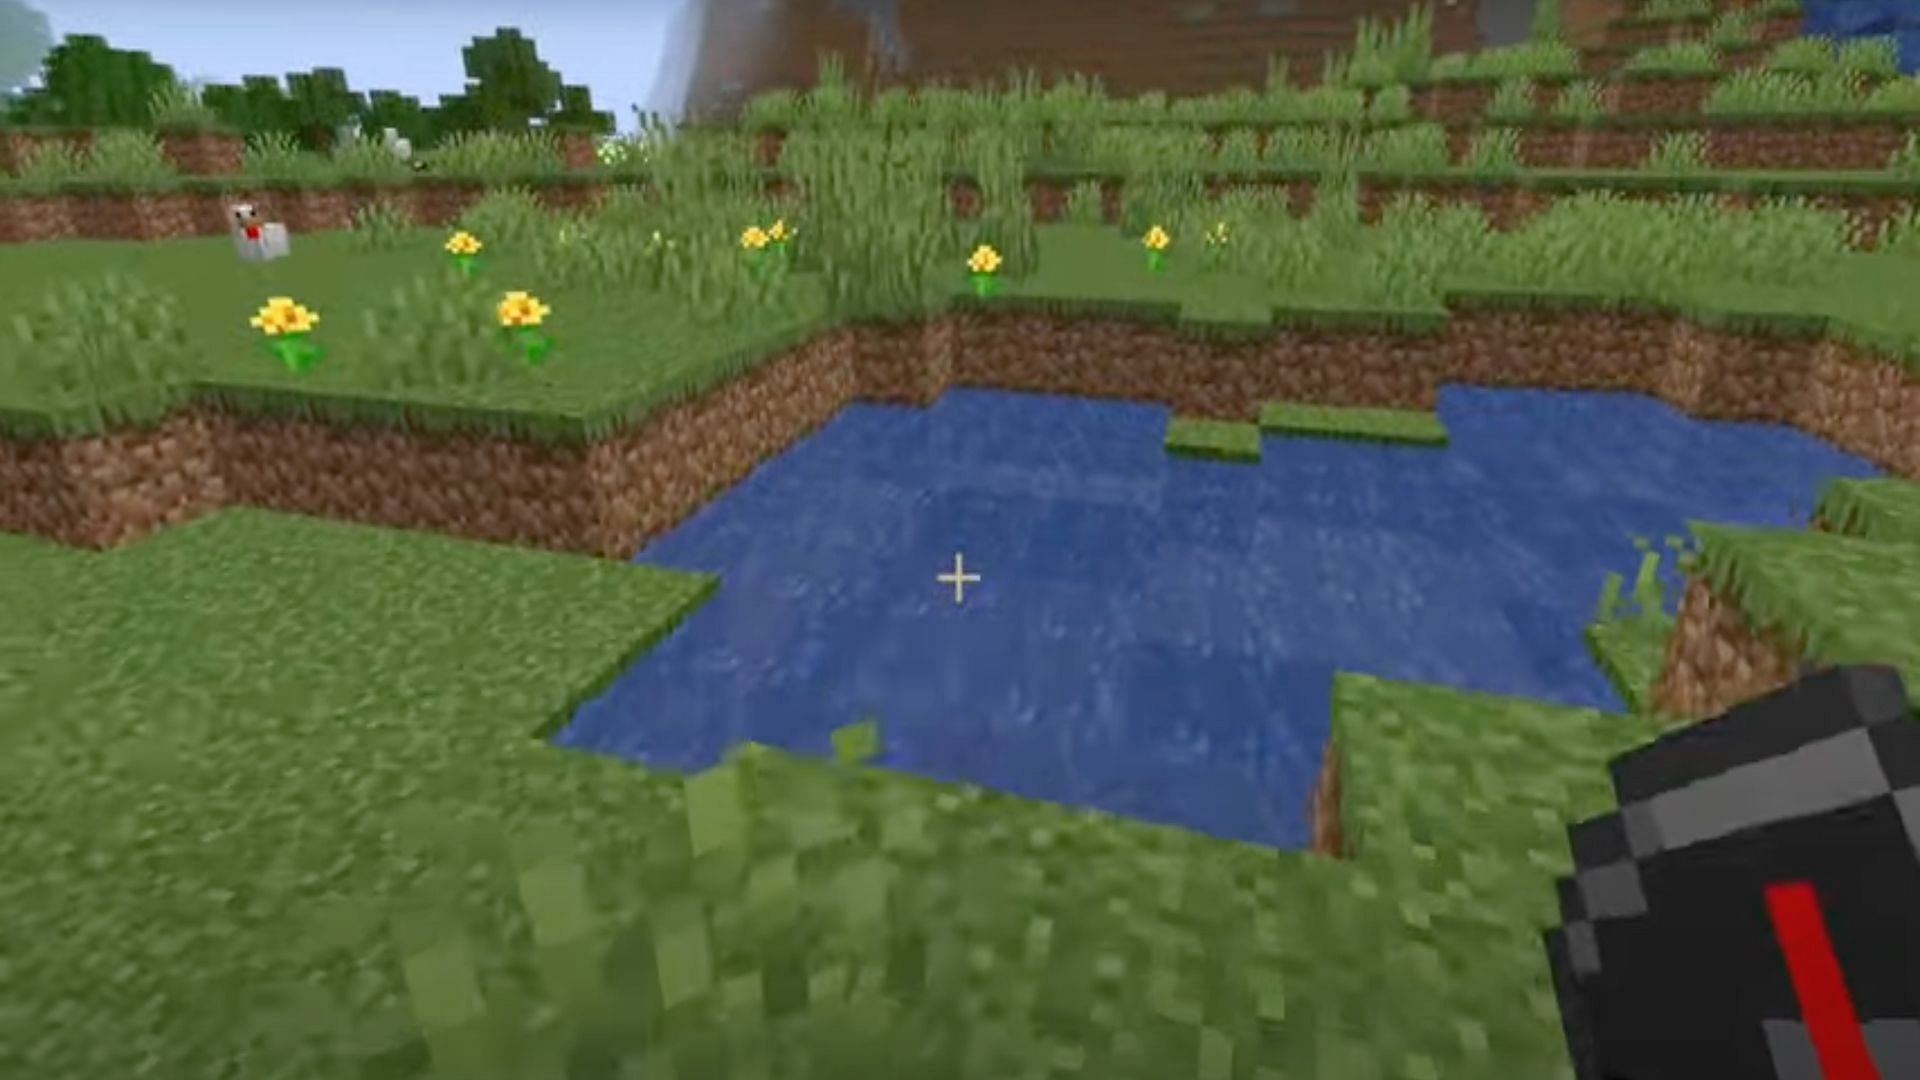 Players can use a compass to find their way around in Minecraft (Image via RajCraft/YouTube)